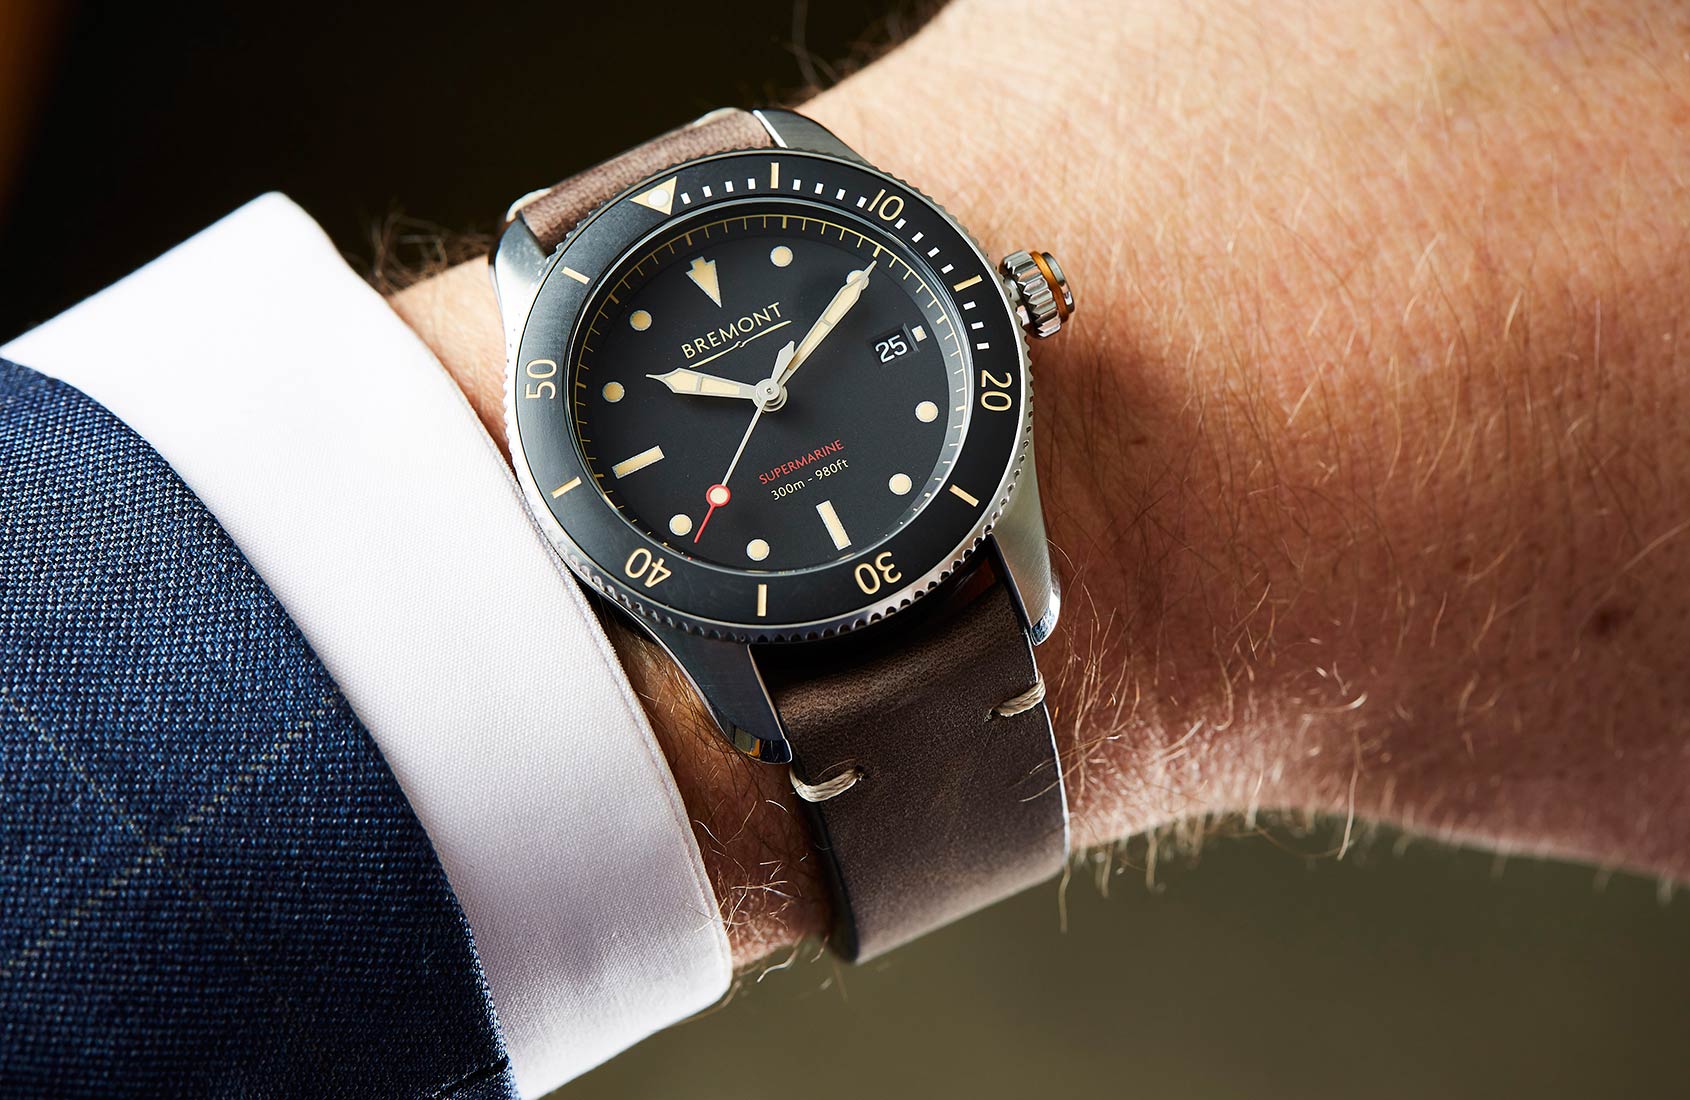 Five best bremont watches for sale